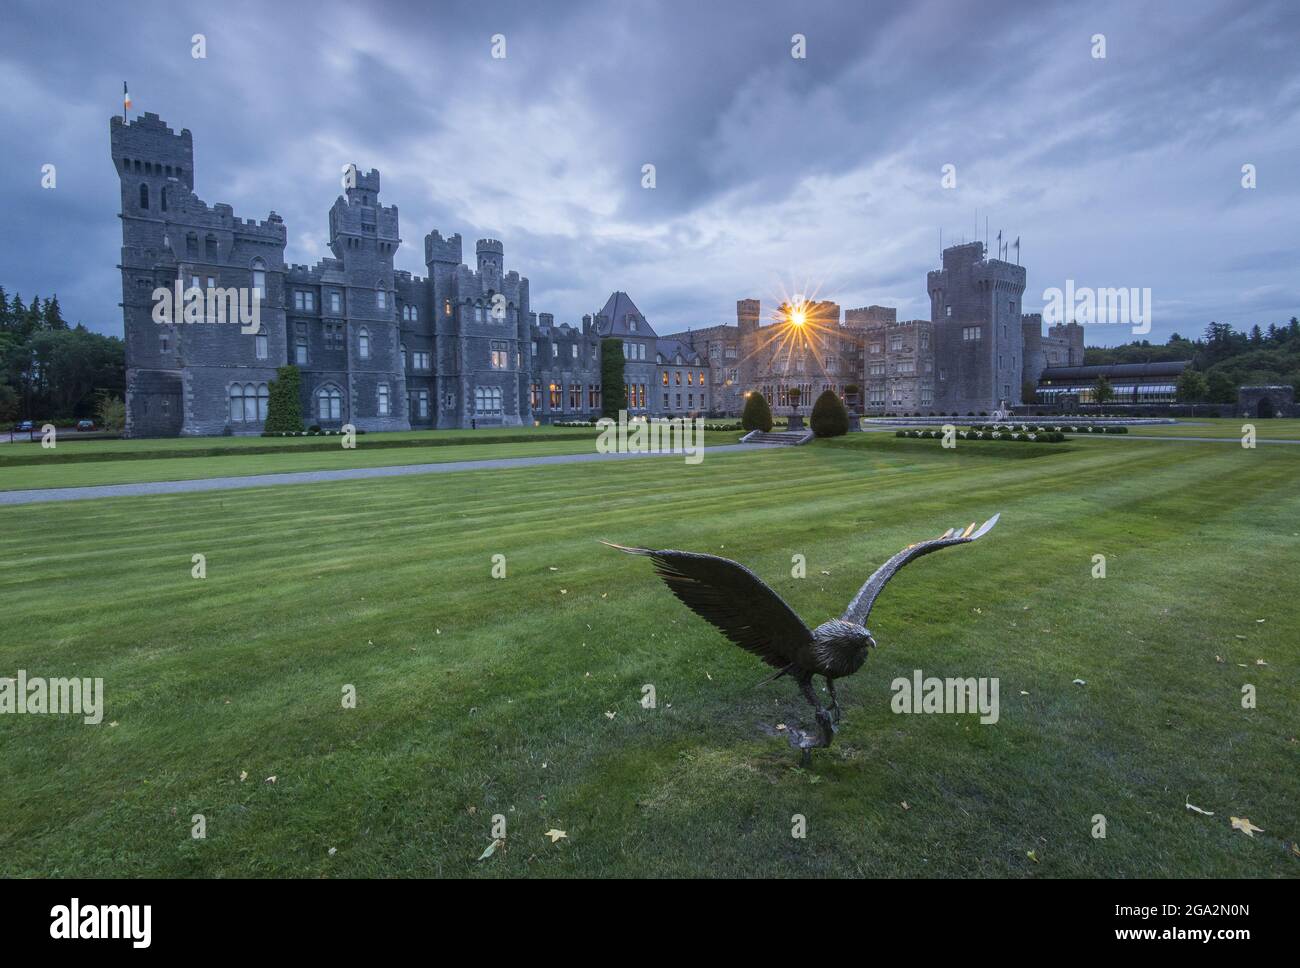 Falcon sculpture and grounds at nighttime at Ashford Castle, a 13th century castle turned into a 5 star luxury hotel; Cong, County Mayo, Ireland Stock Photo